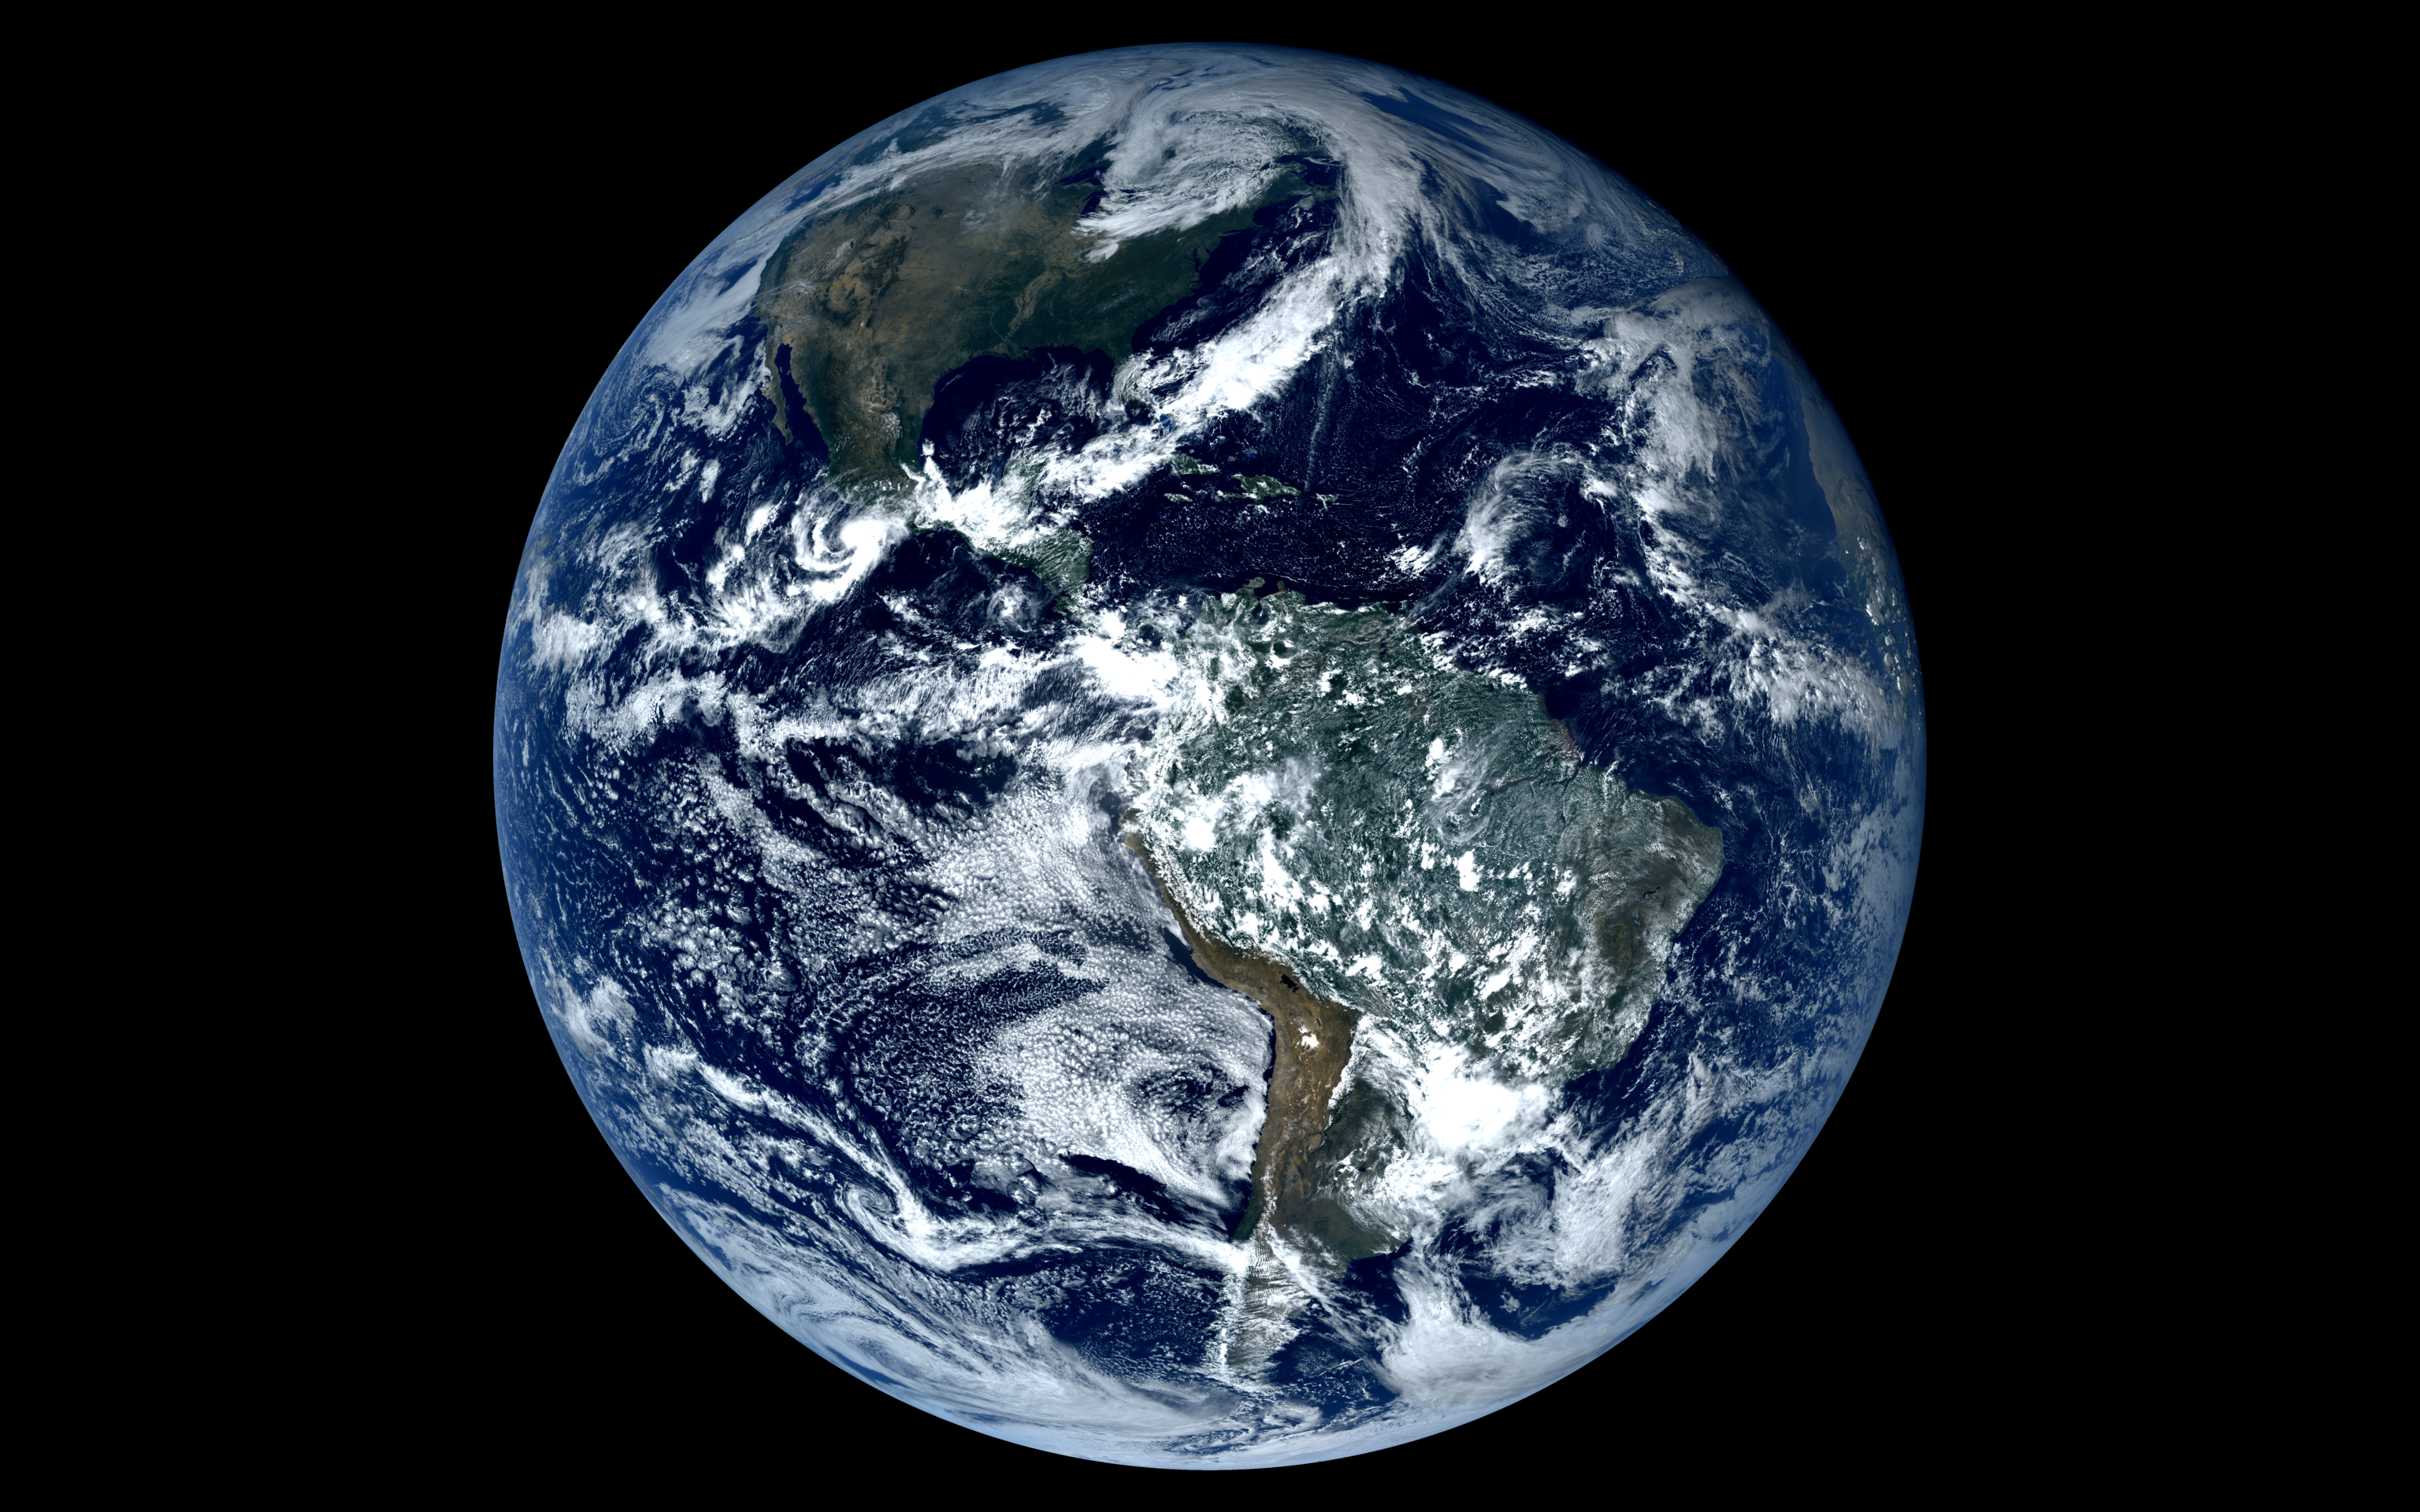 Live photo of earth from space (Python) [Code]